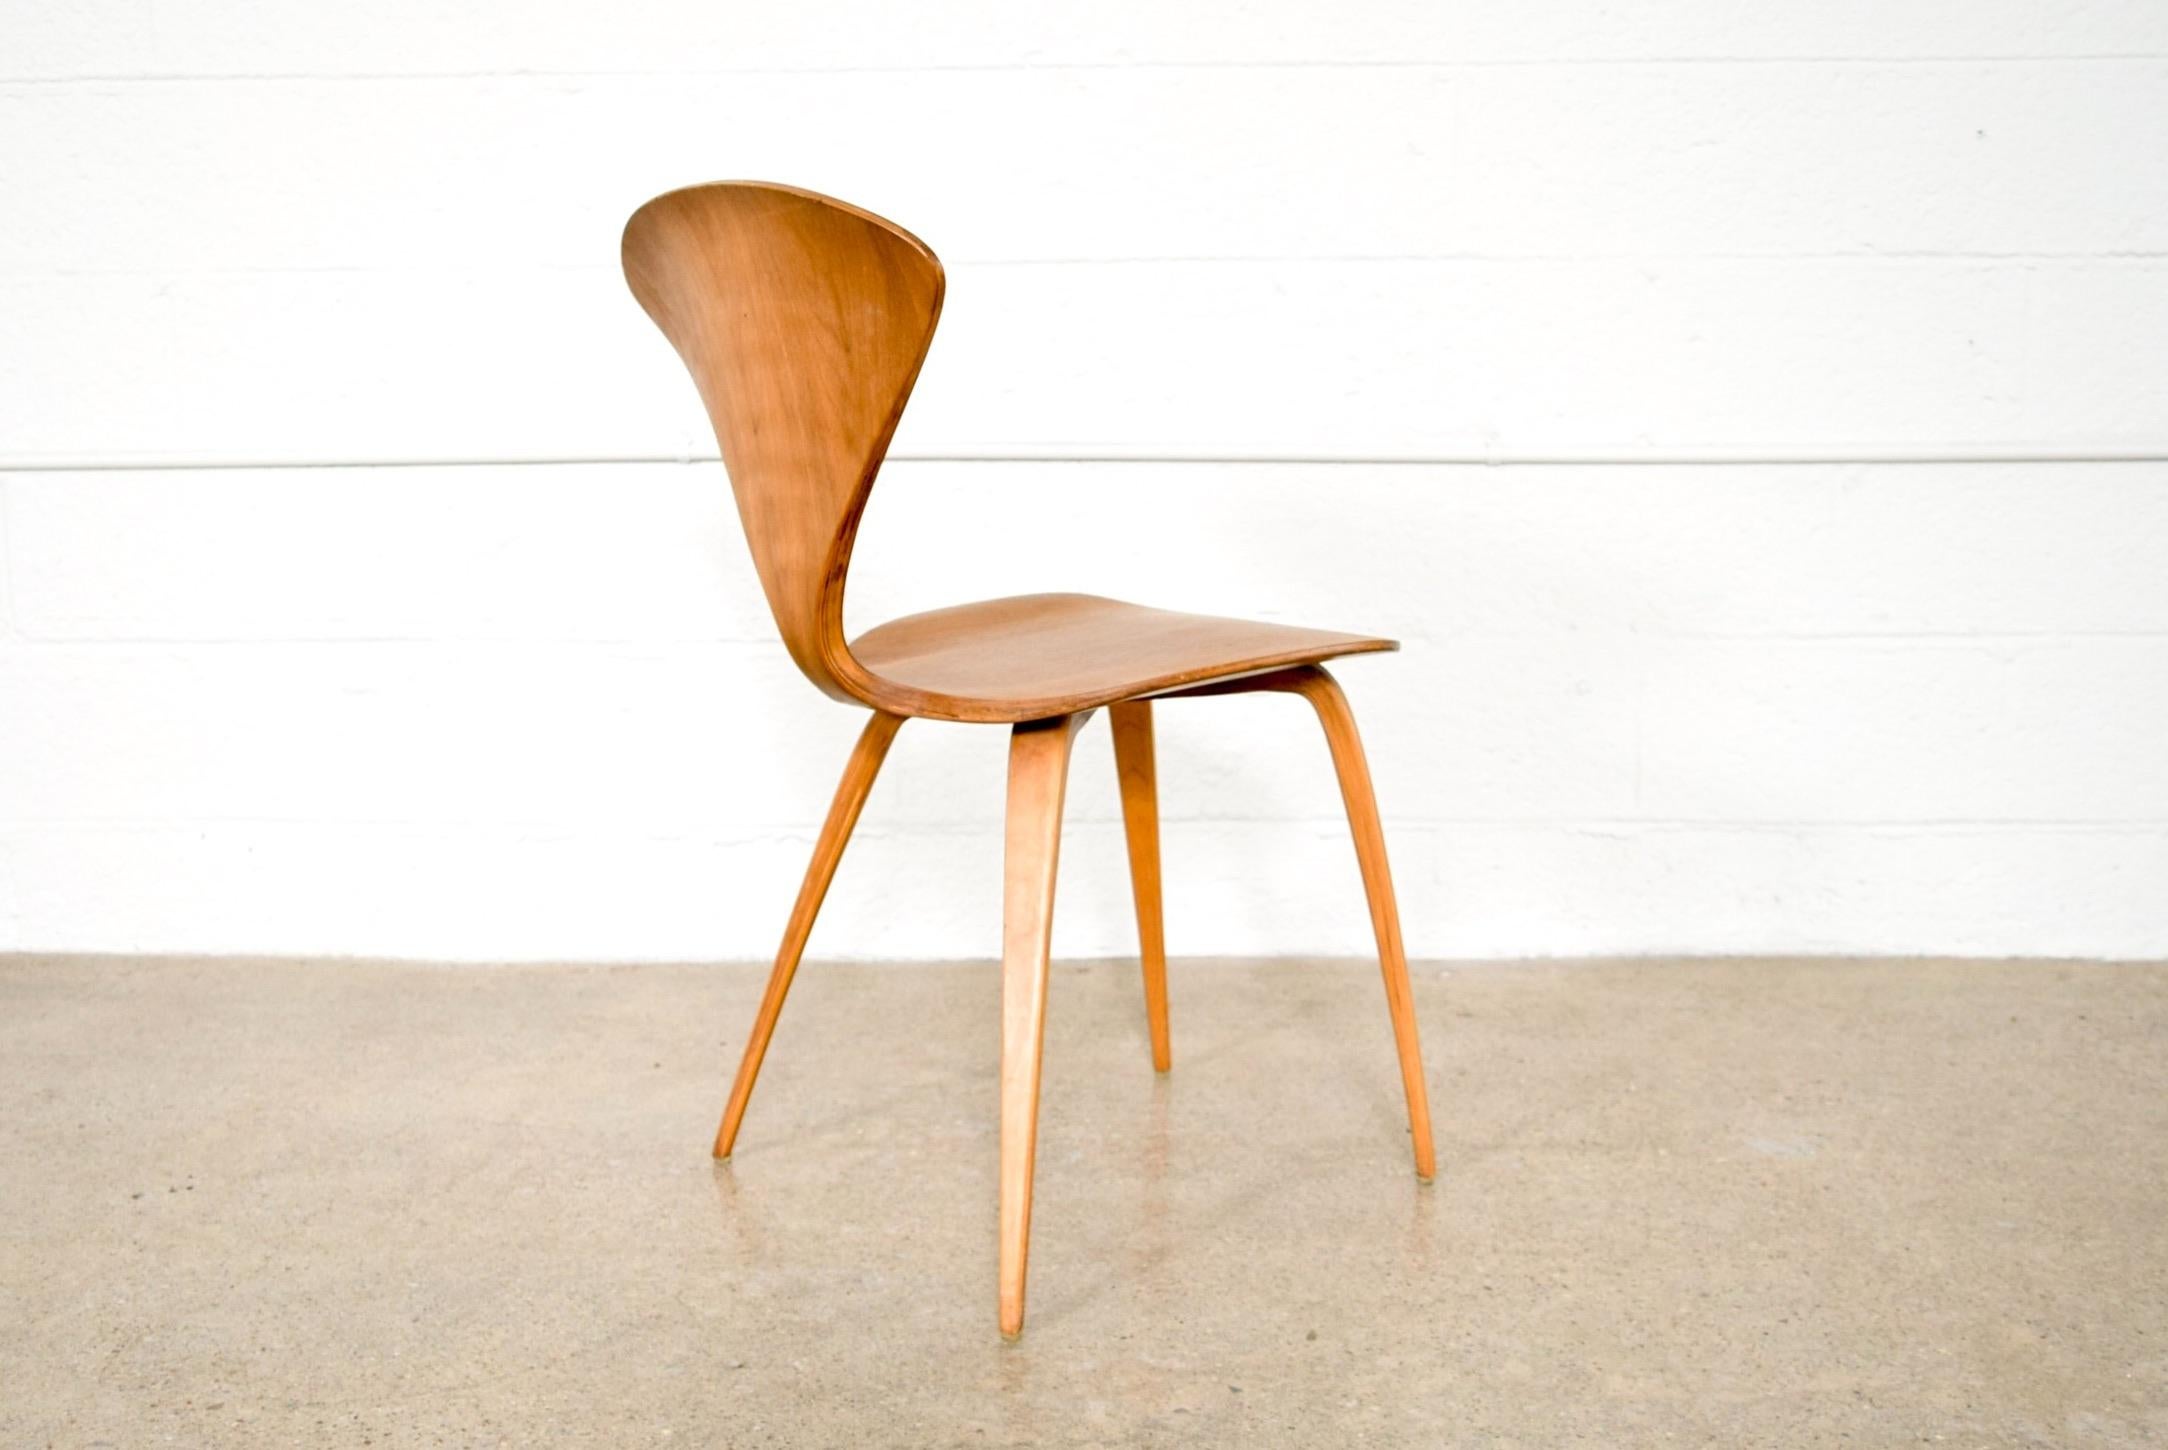 Mid-20th Century Mid-Century Modern Norman Cherner for Plycraft Wood Side Chair, 1960s For Sale